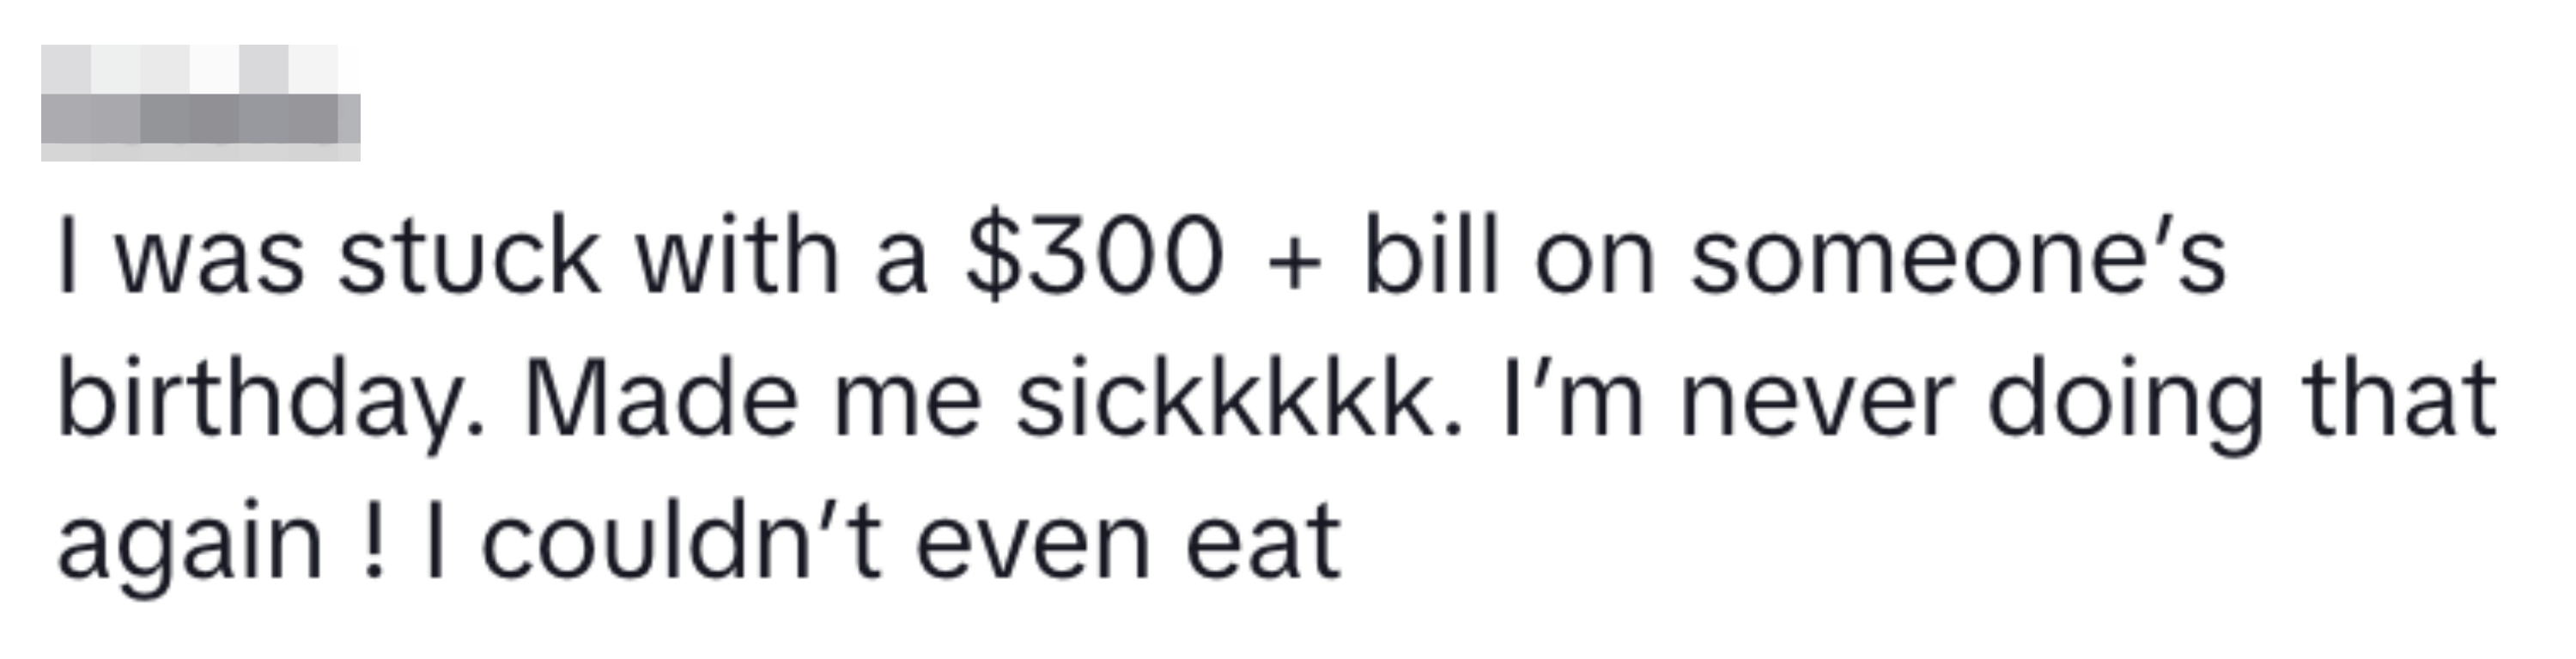 &quot;I was stuck with a $300 + bill on someone&#x27;s birthday. Made me sick. I&#x27;m never doing that again! I couldn&#x27;t even eat&quot;